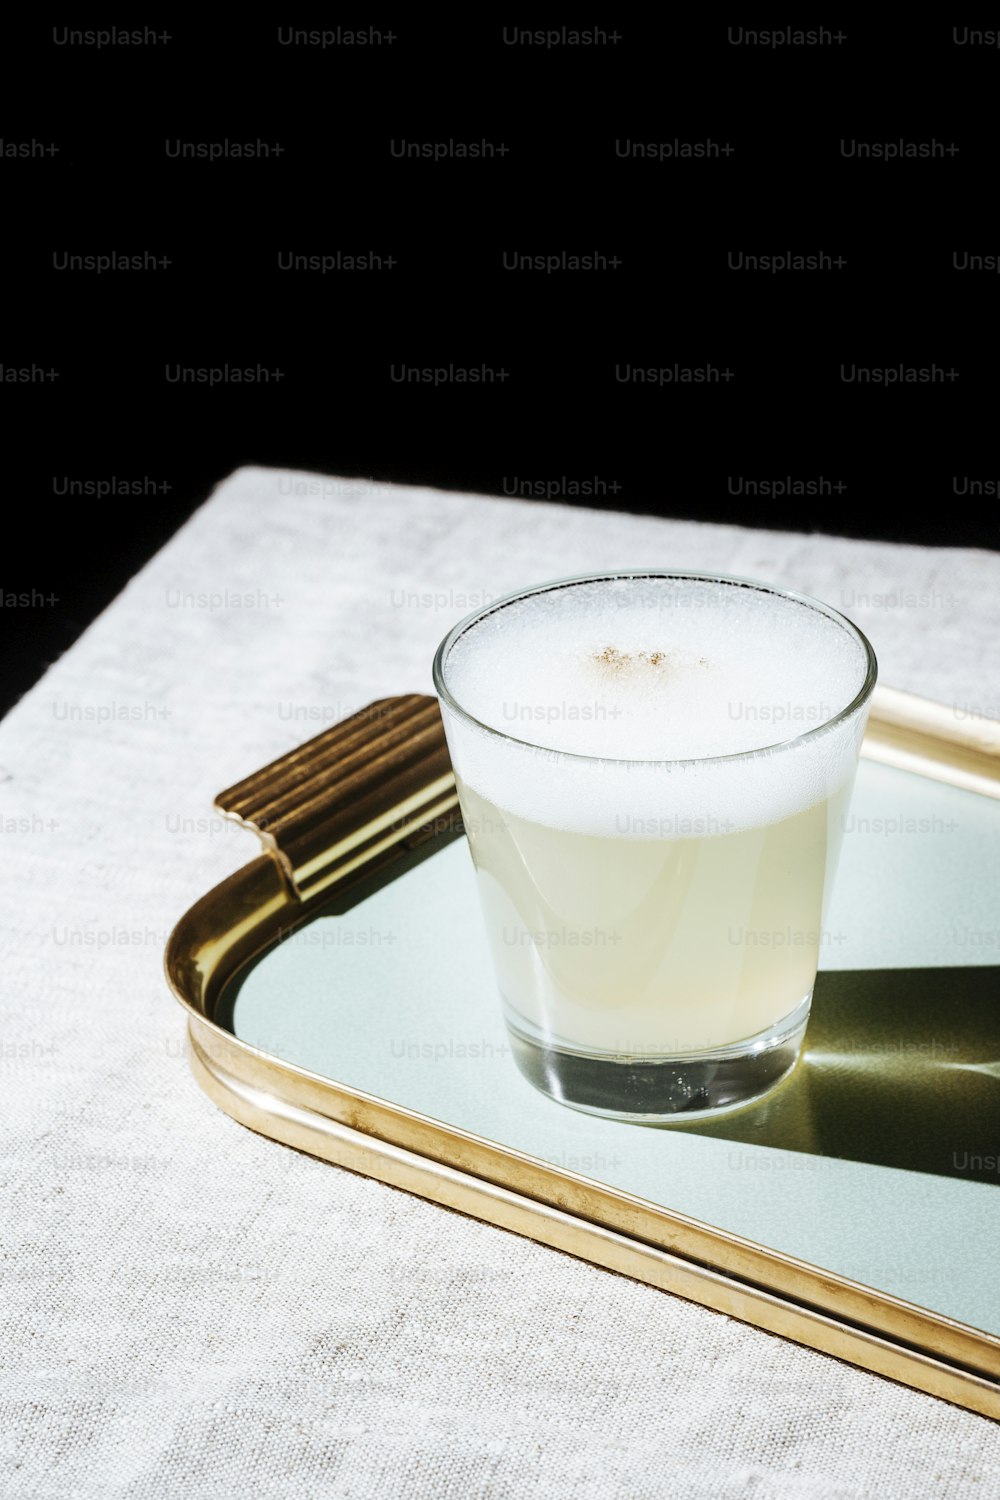 Pisco Sour, cocktail IBA with Pisco, lime or lemon juice, egg white, and angostura bitter. Dark background, pop contemporary style.